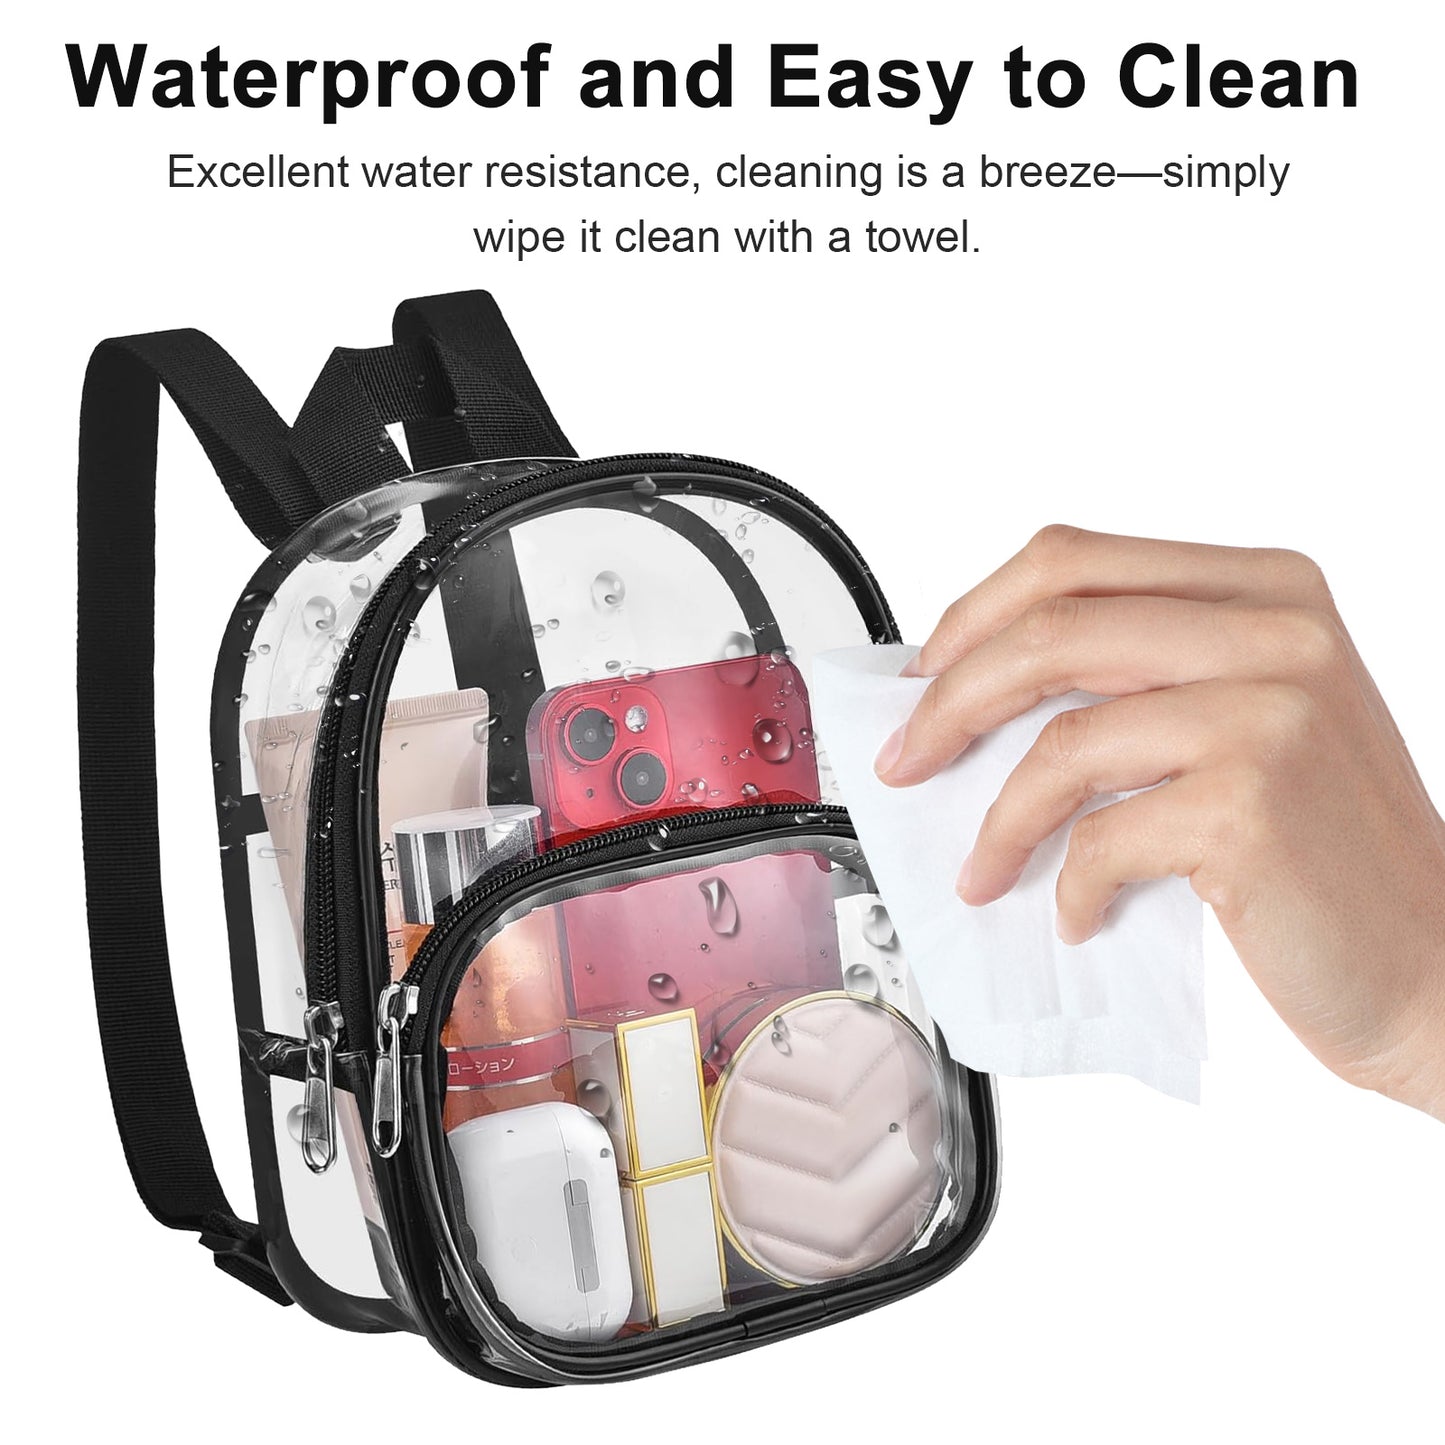 Fashion Mini Clear Backpack - 9x7.5x2.8 in Waterproof Small Clear Backpack for Security Travel Concert Sport Events(Black)